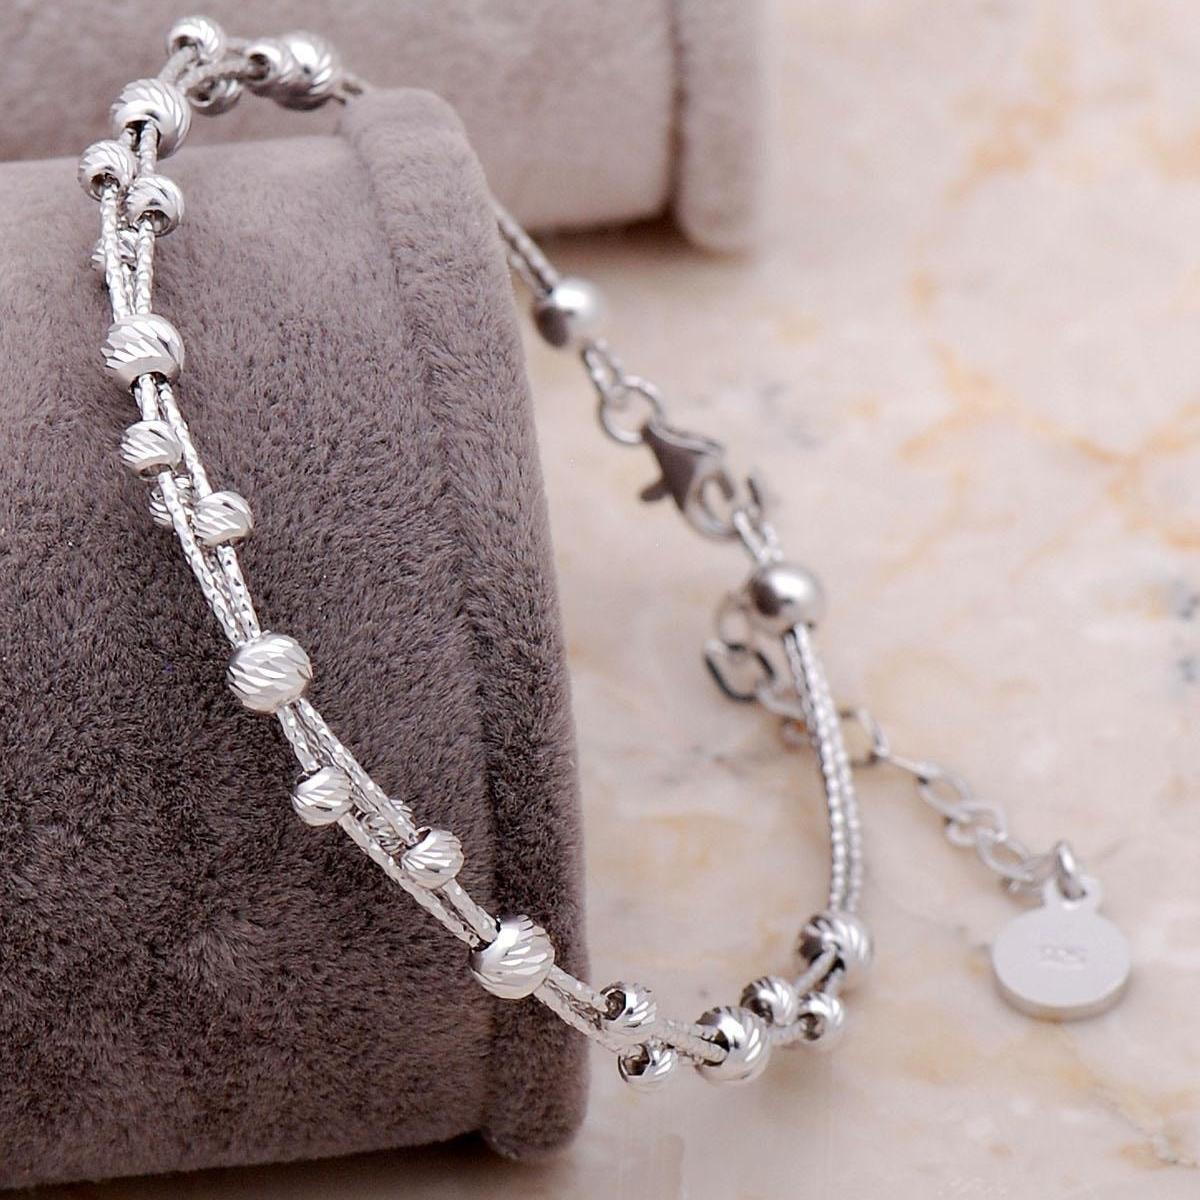 Hand Made Satellite Chain Bracelet • Bridesmaid Gift For Wedding Day - Trending Silver Gifts